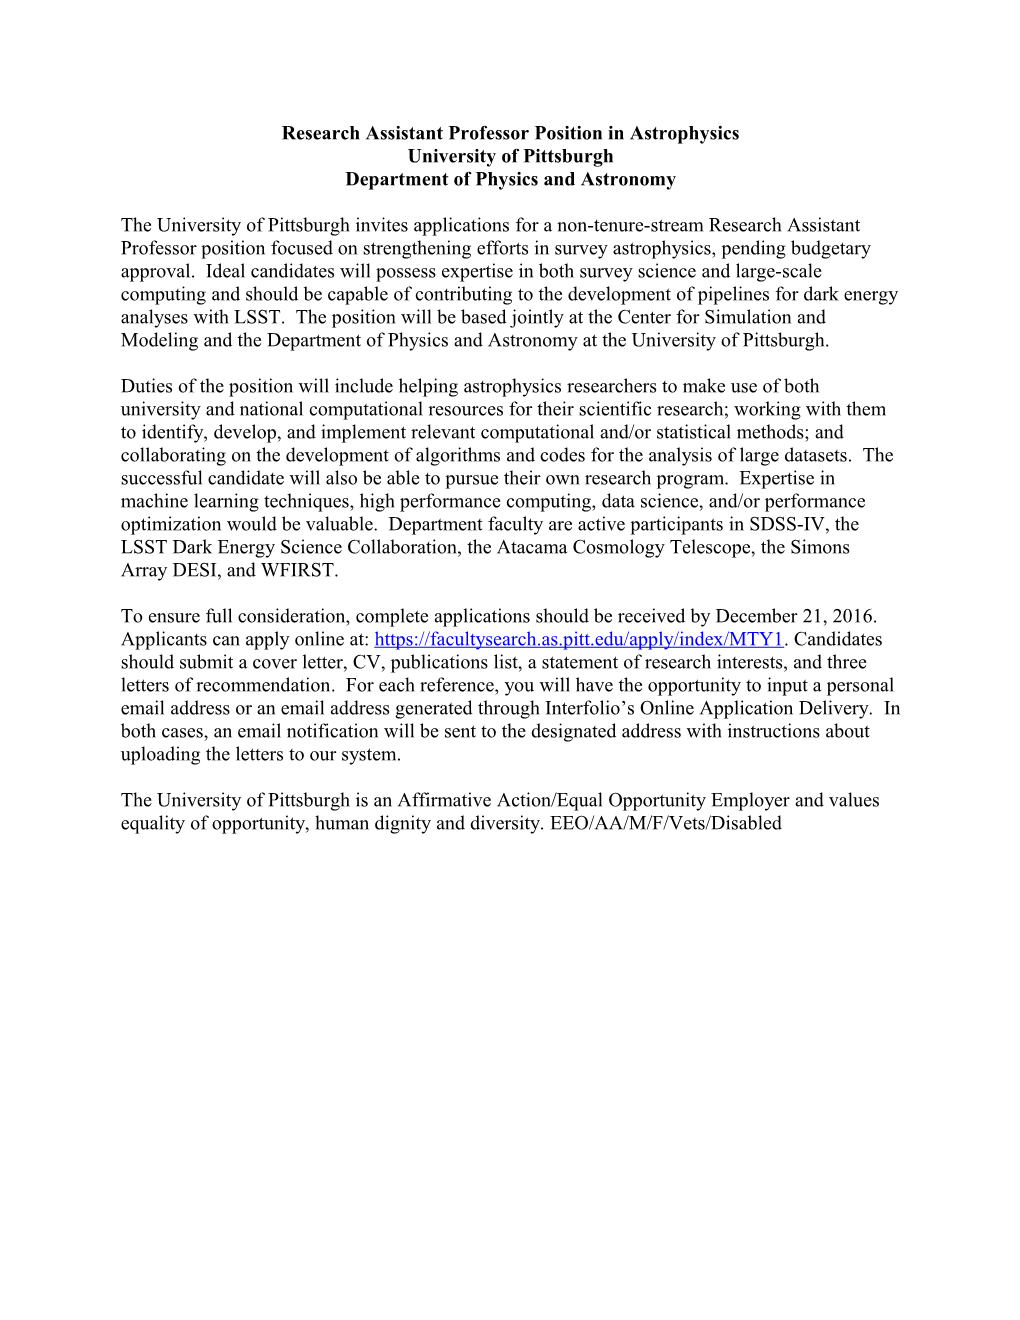 Research Assistant Professor Position in Astrophysics